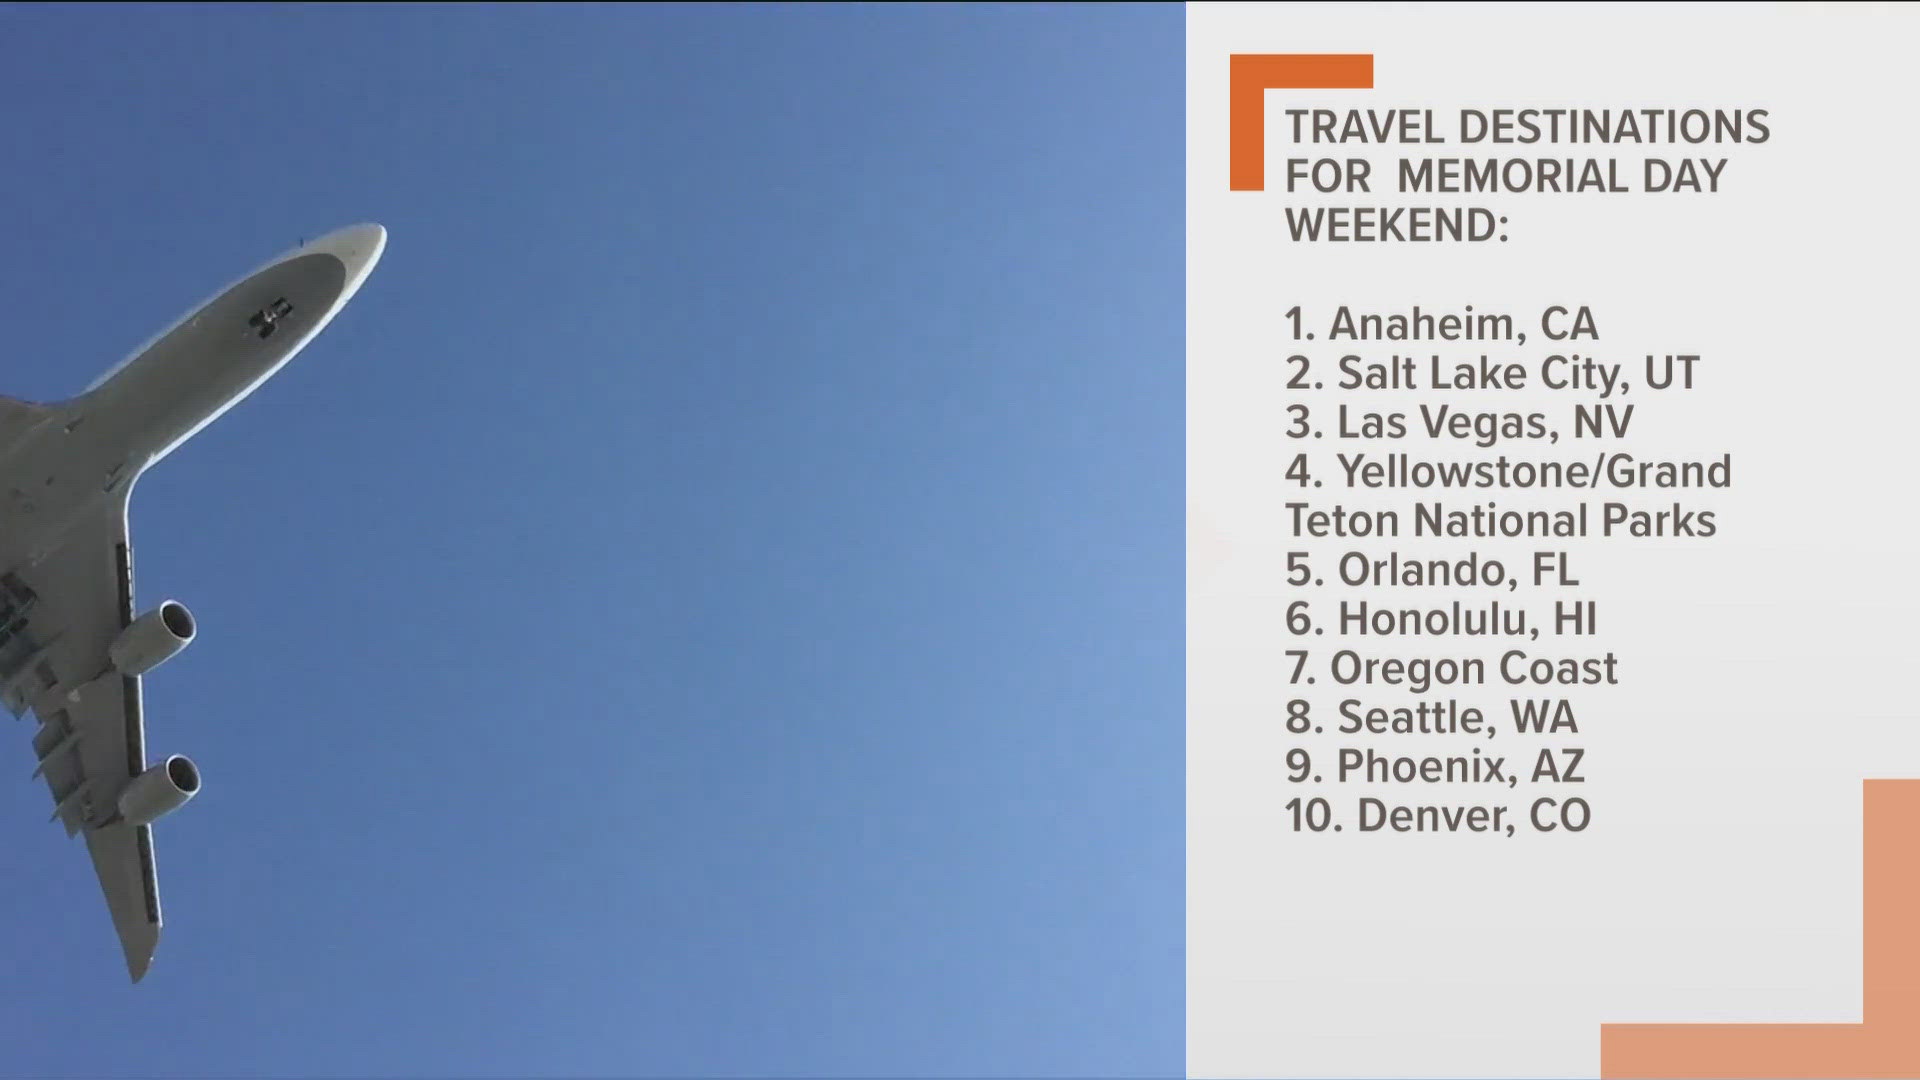 Memorial Day travel plans are up after Covid.